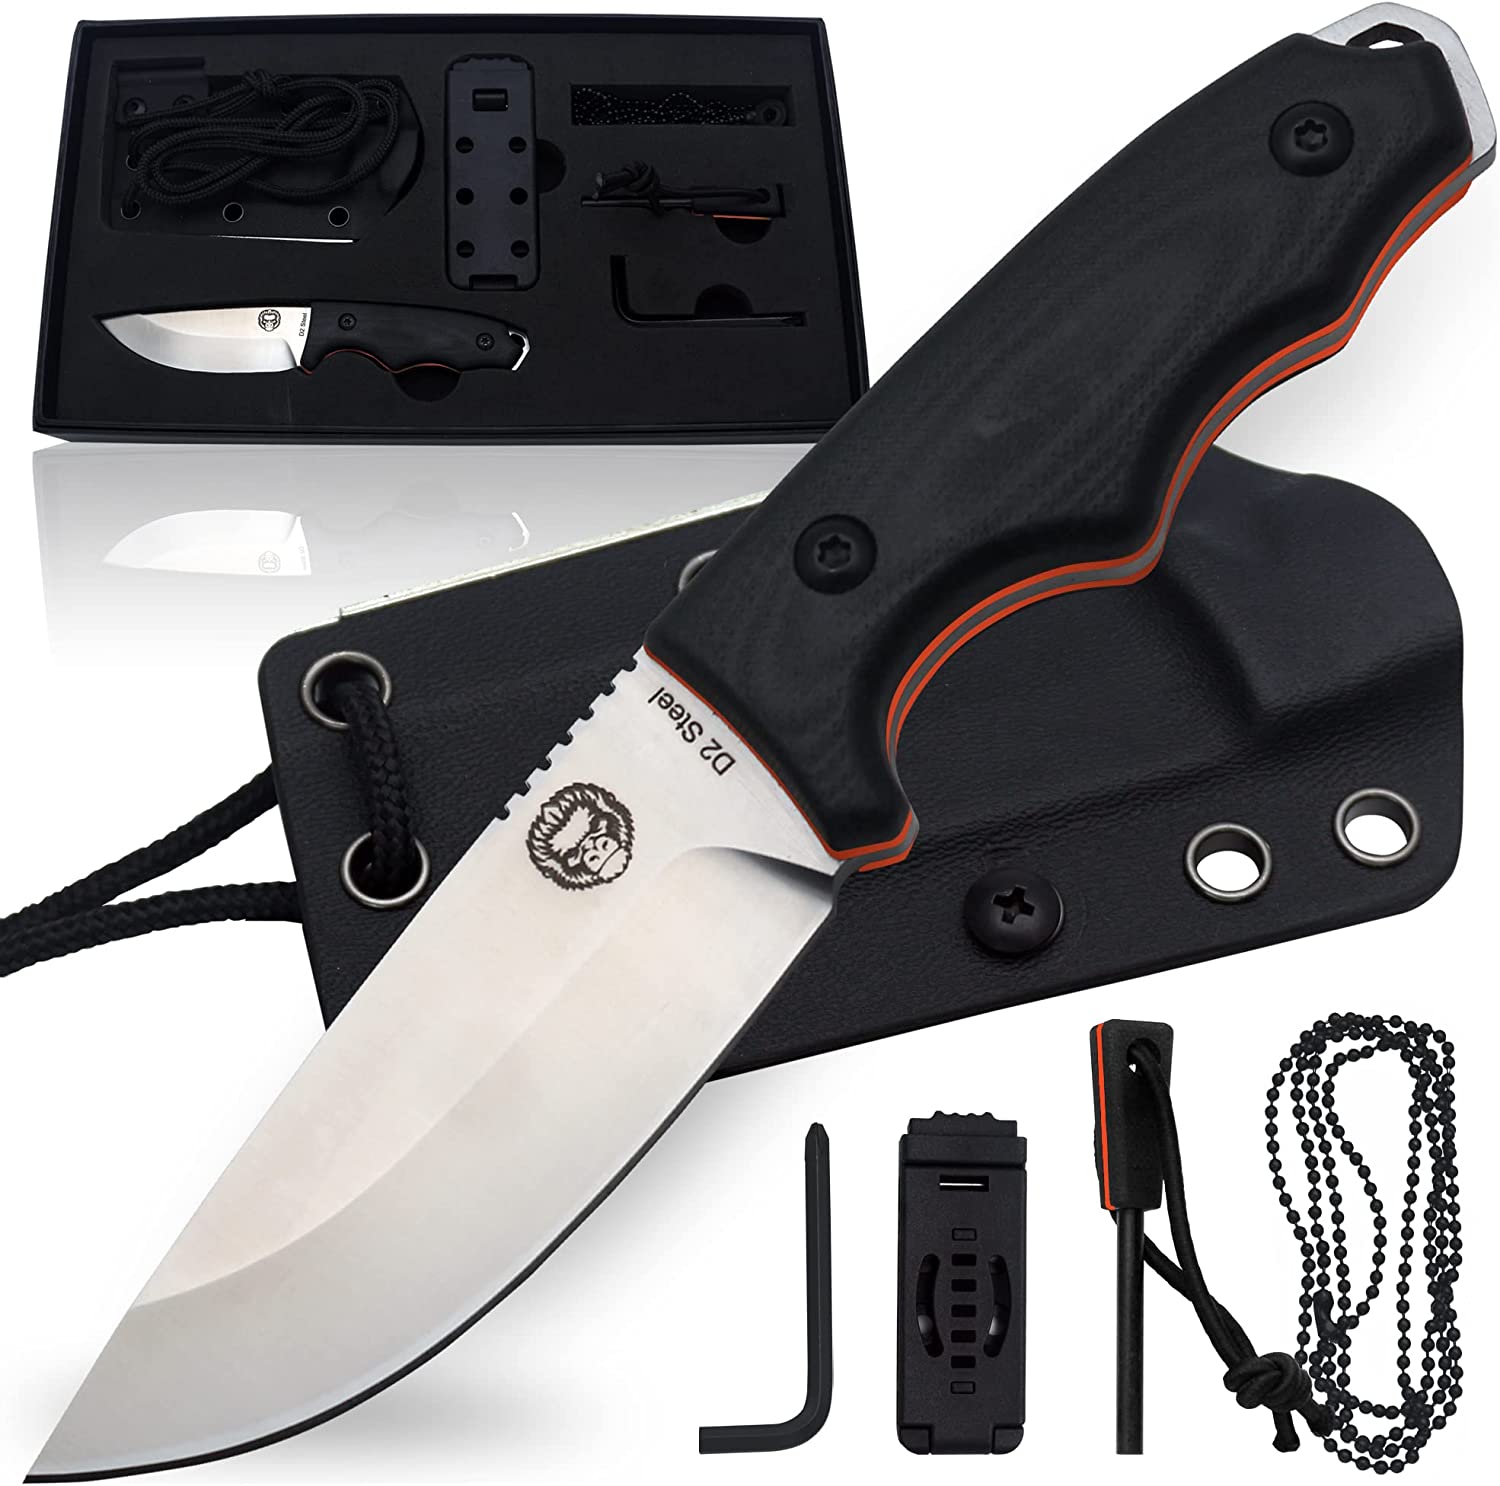 Survival Knife | Bushcraft Neck Knife Men’s Gift Set Fixed Blade Ambidextrous Kydex Sheath & Ferro Rod – Full Tang EDC D2 Blade – Nonslip Handle with Blade Jimping – Great For Camping Trekking (Silver Blade + Black and Orange Liner)